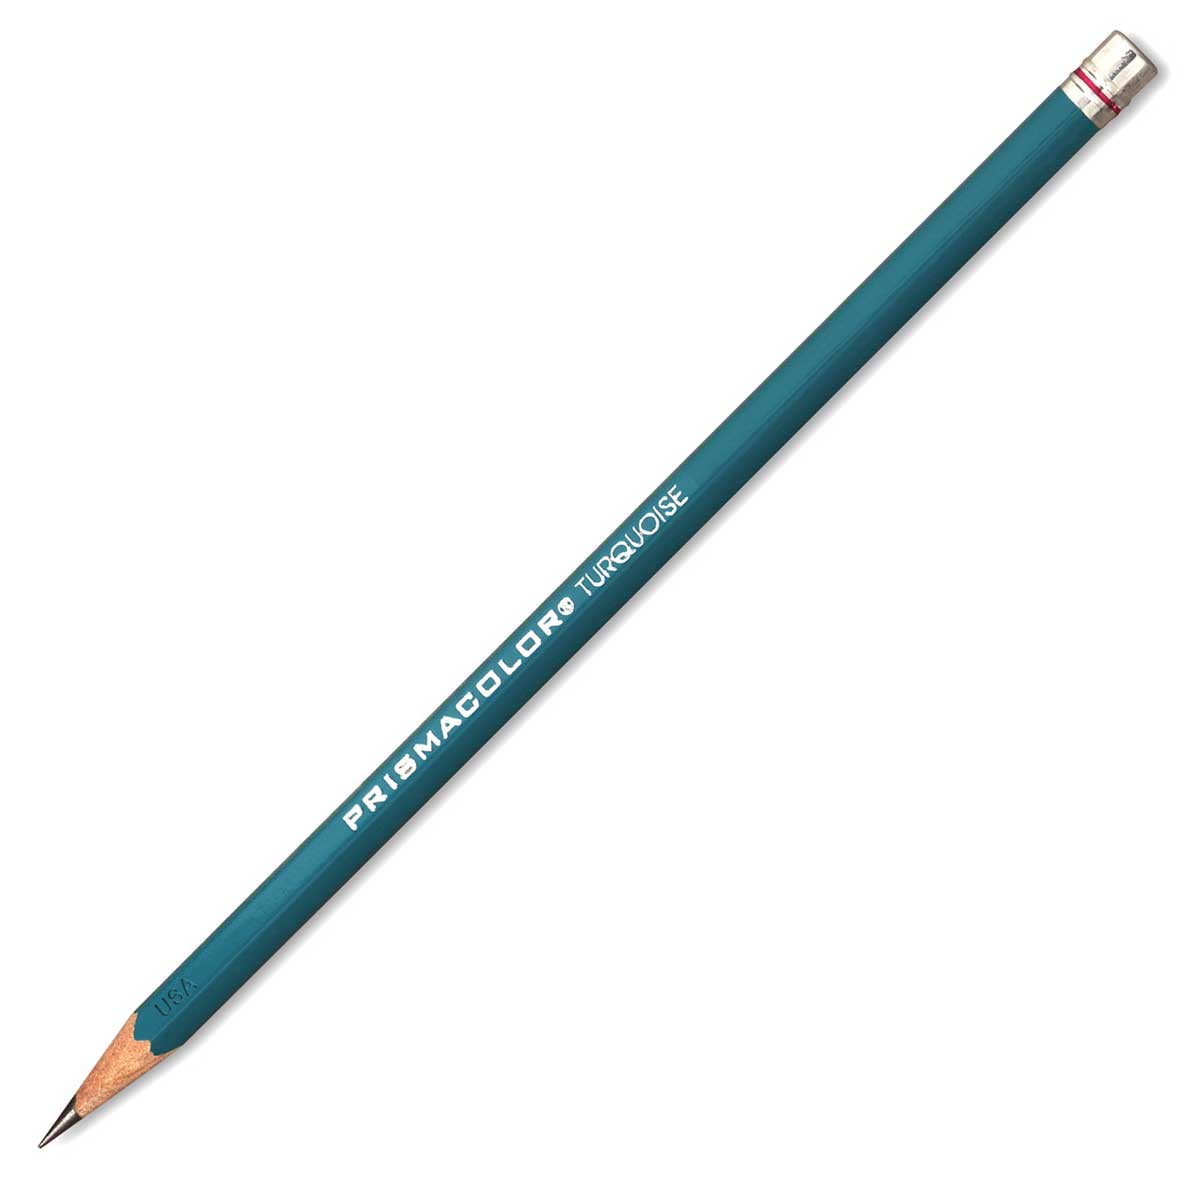 Prismacolor Turquoise Drawing Pencil - 9B